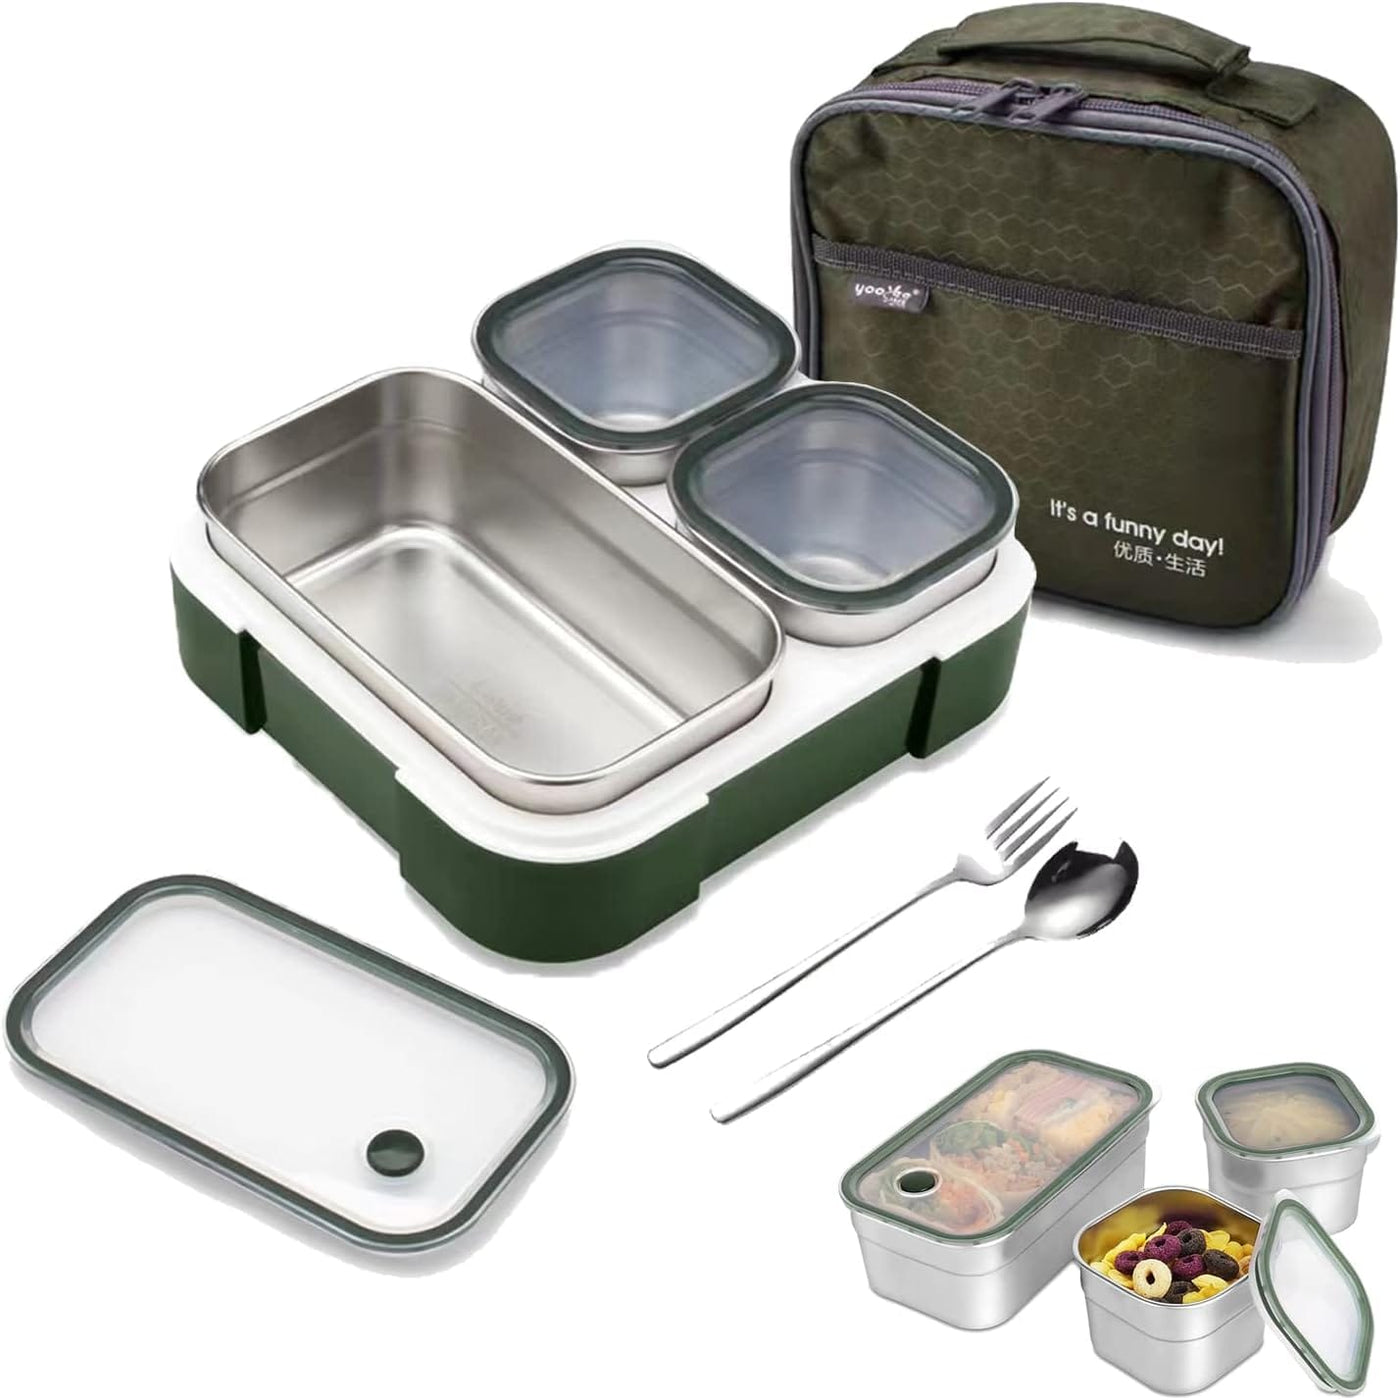 Dubkart Stainless Steel Insulated Bento Lunch Box with Tableware & Bag